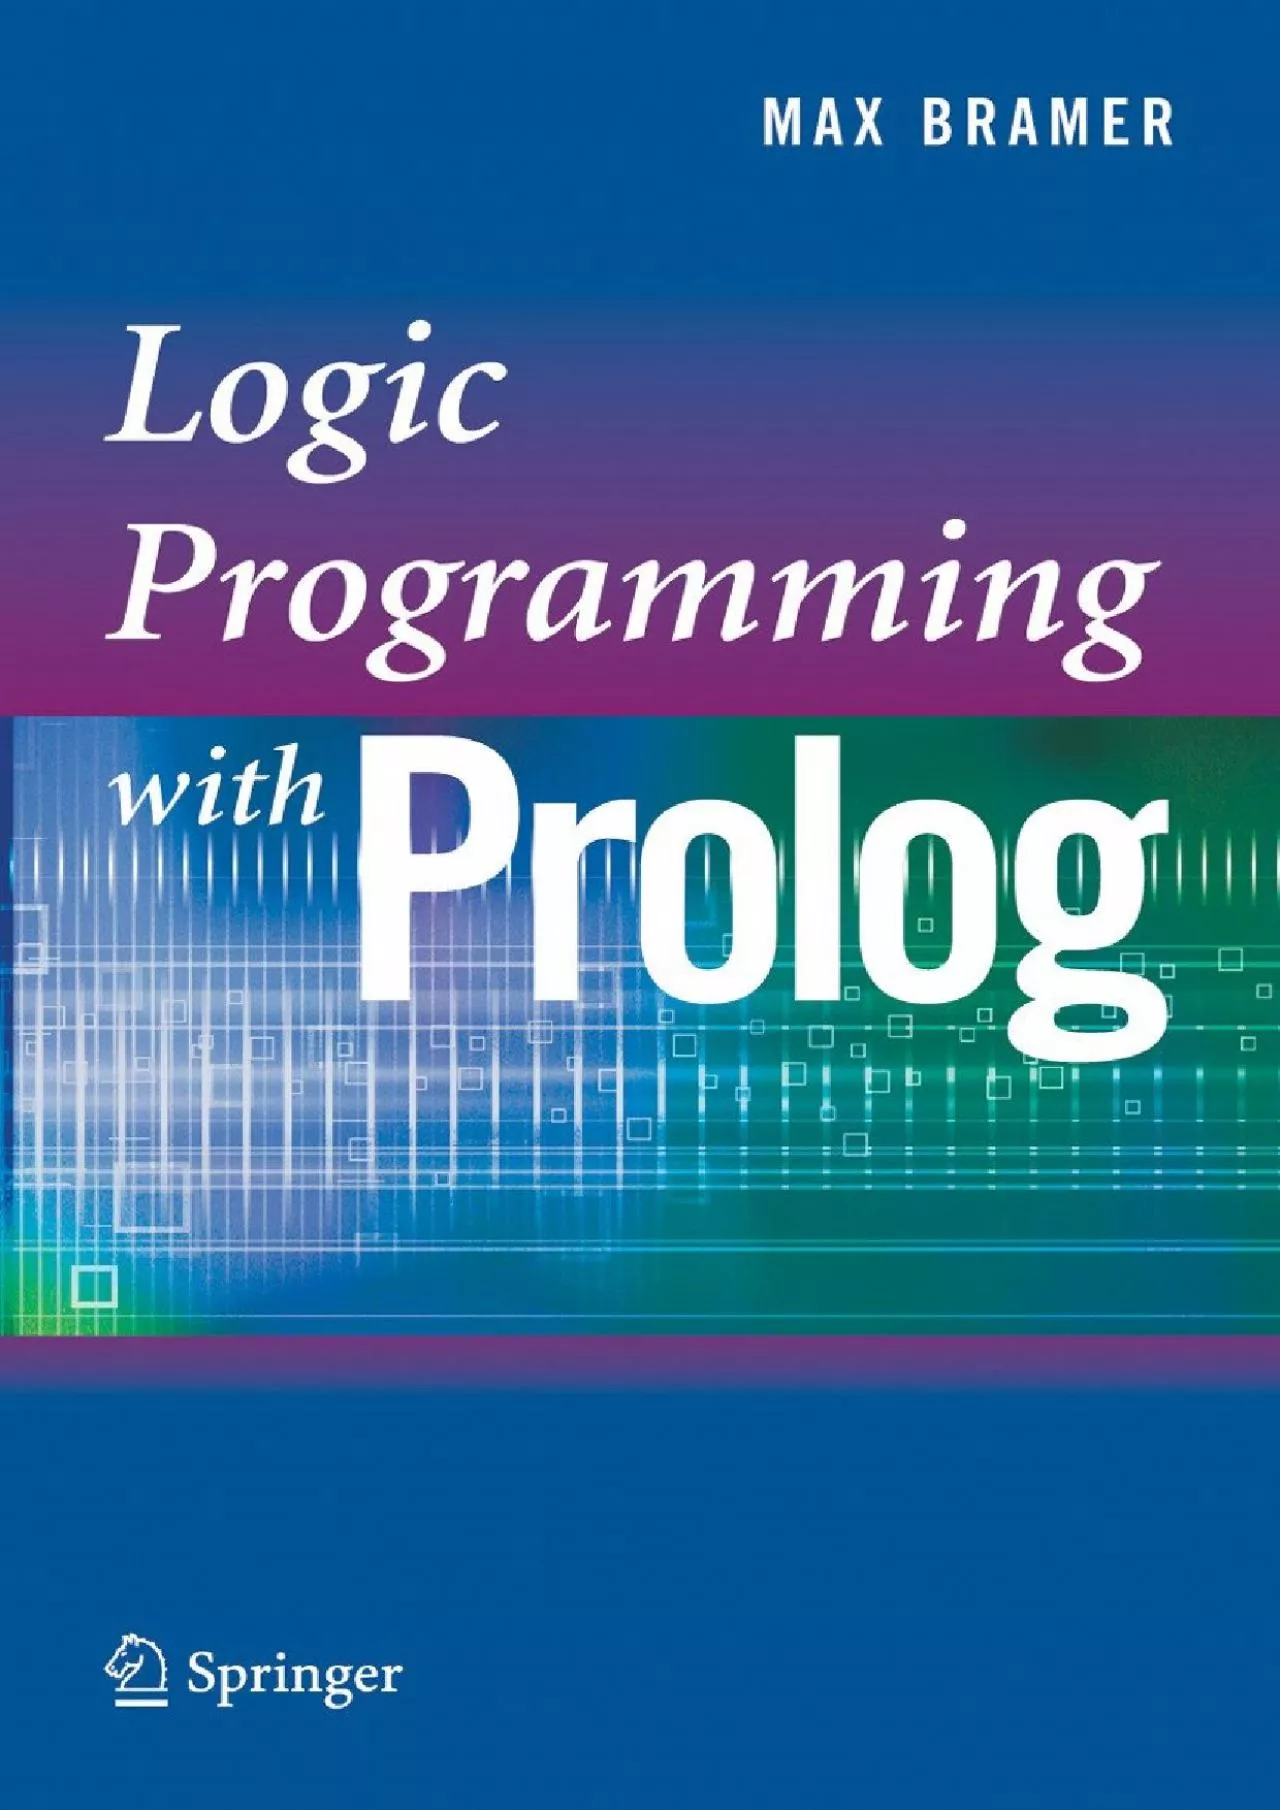 [READ]-Logic Programming with Prolog